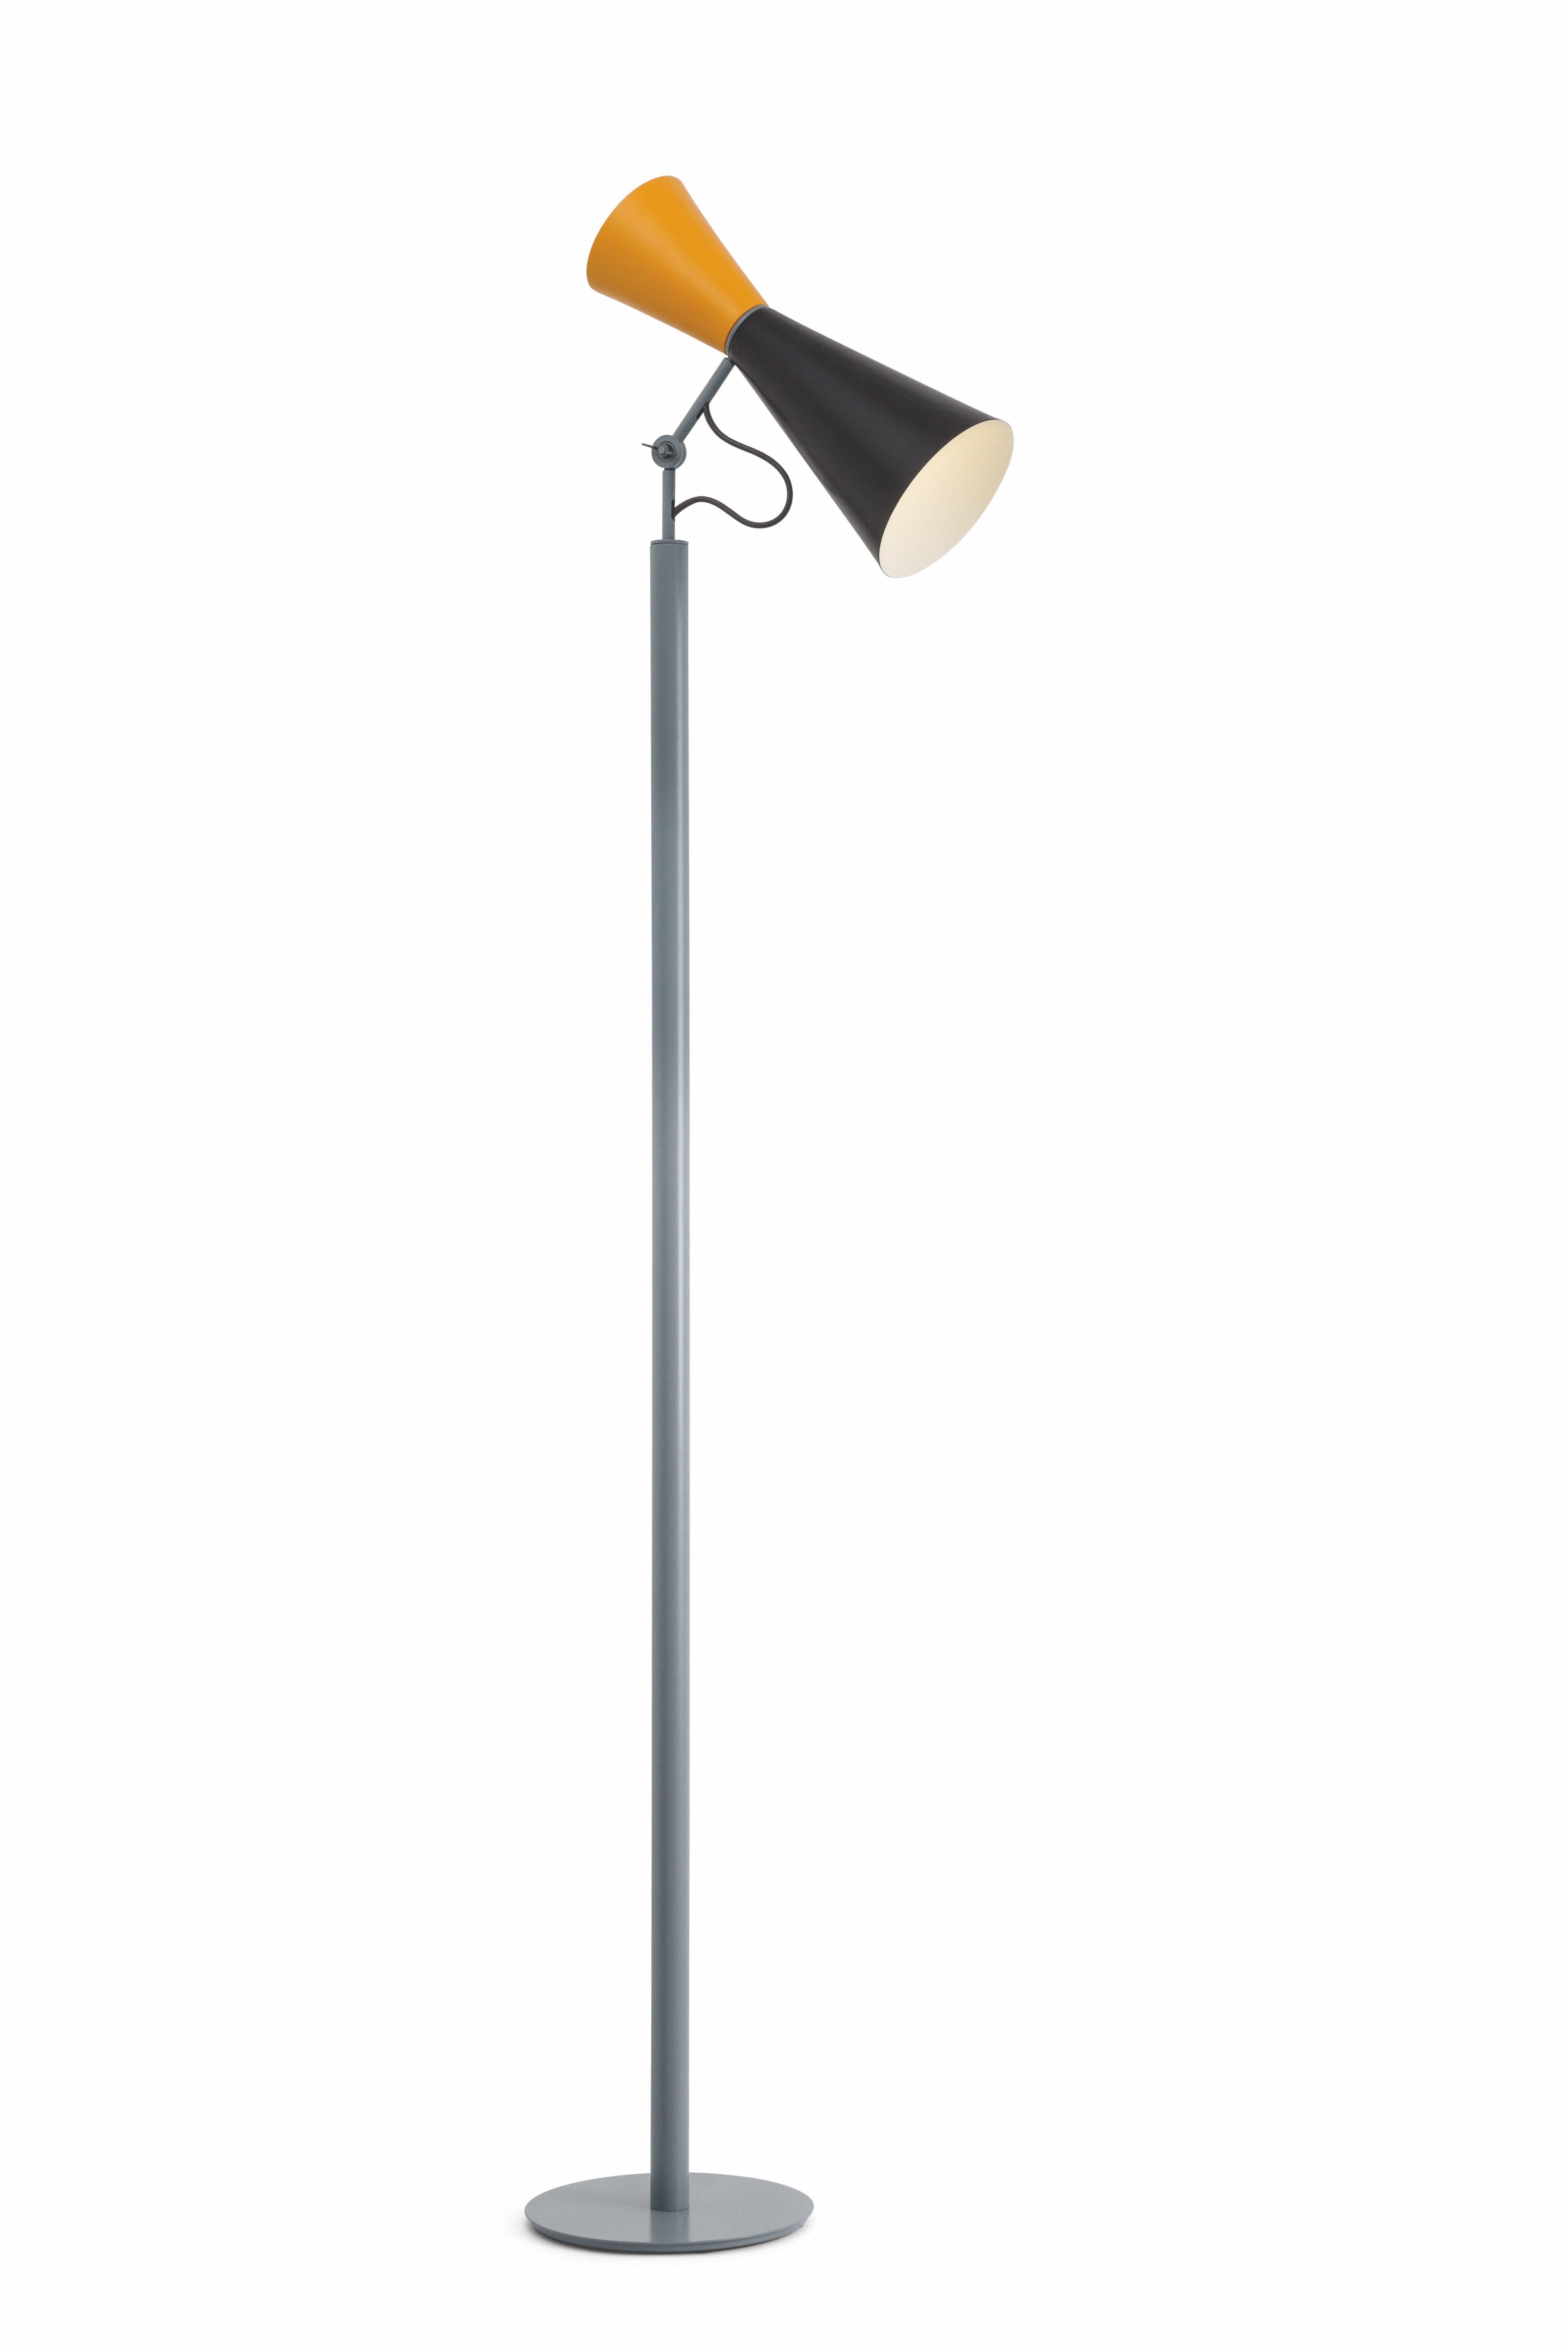 Parliament floor lamp by Le Corbusier. Current production manufactured in France by Nemo Lighting. Painted aluminum. Wired for U.S. standards. Shade adjust to various positions. Le Corbusier designed the Parliament lamp for the Chandigarh Parliament